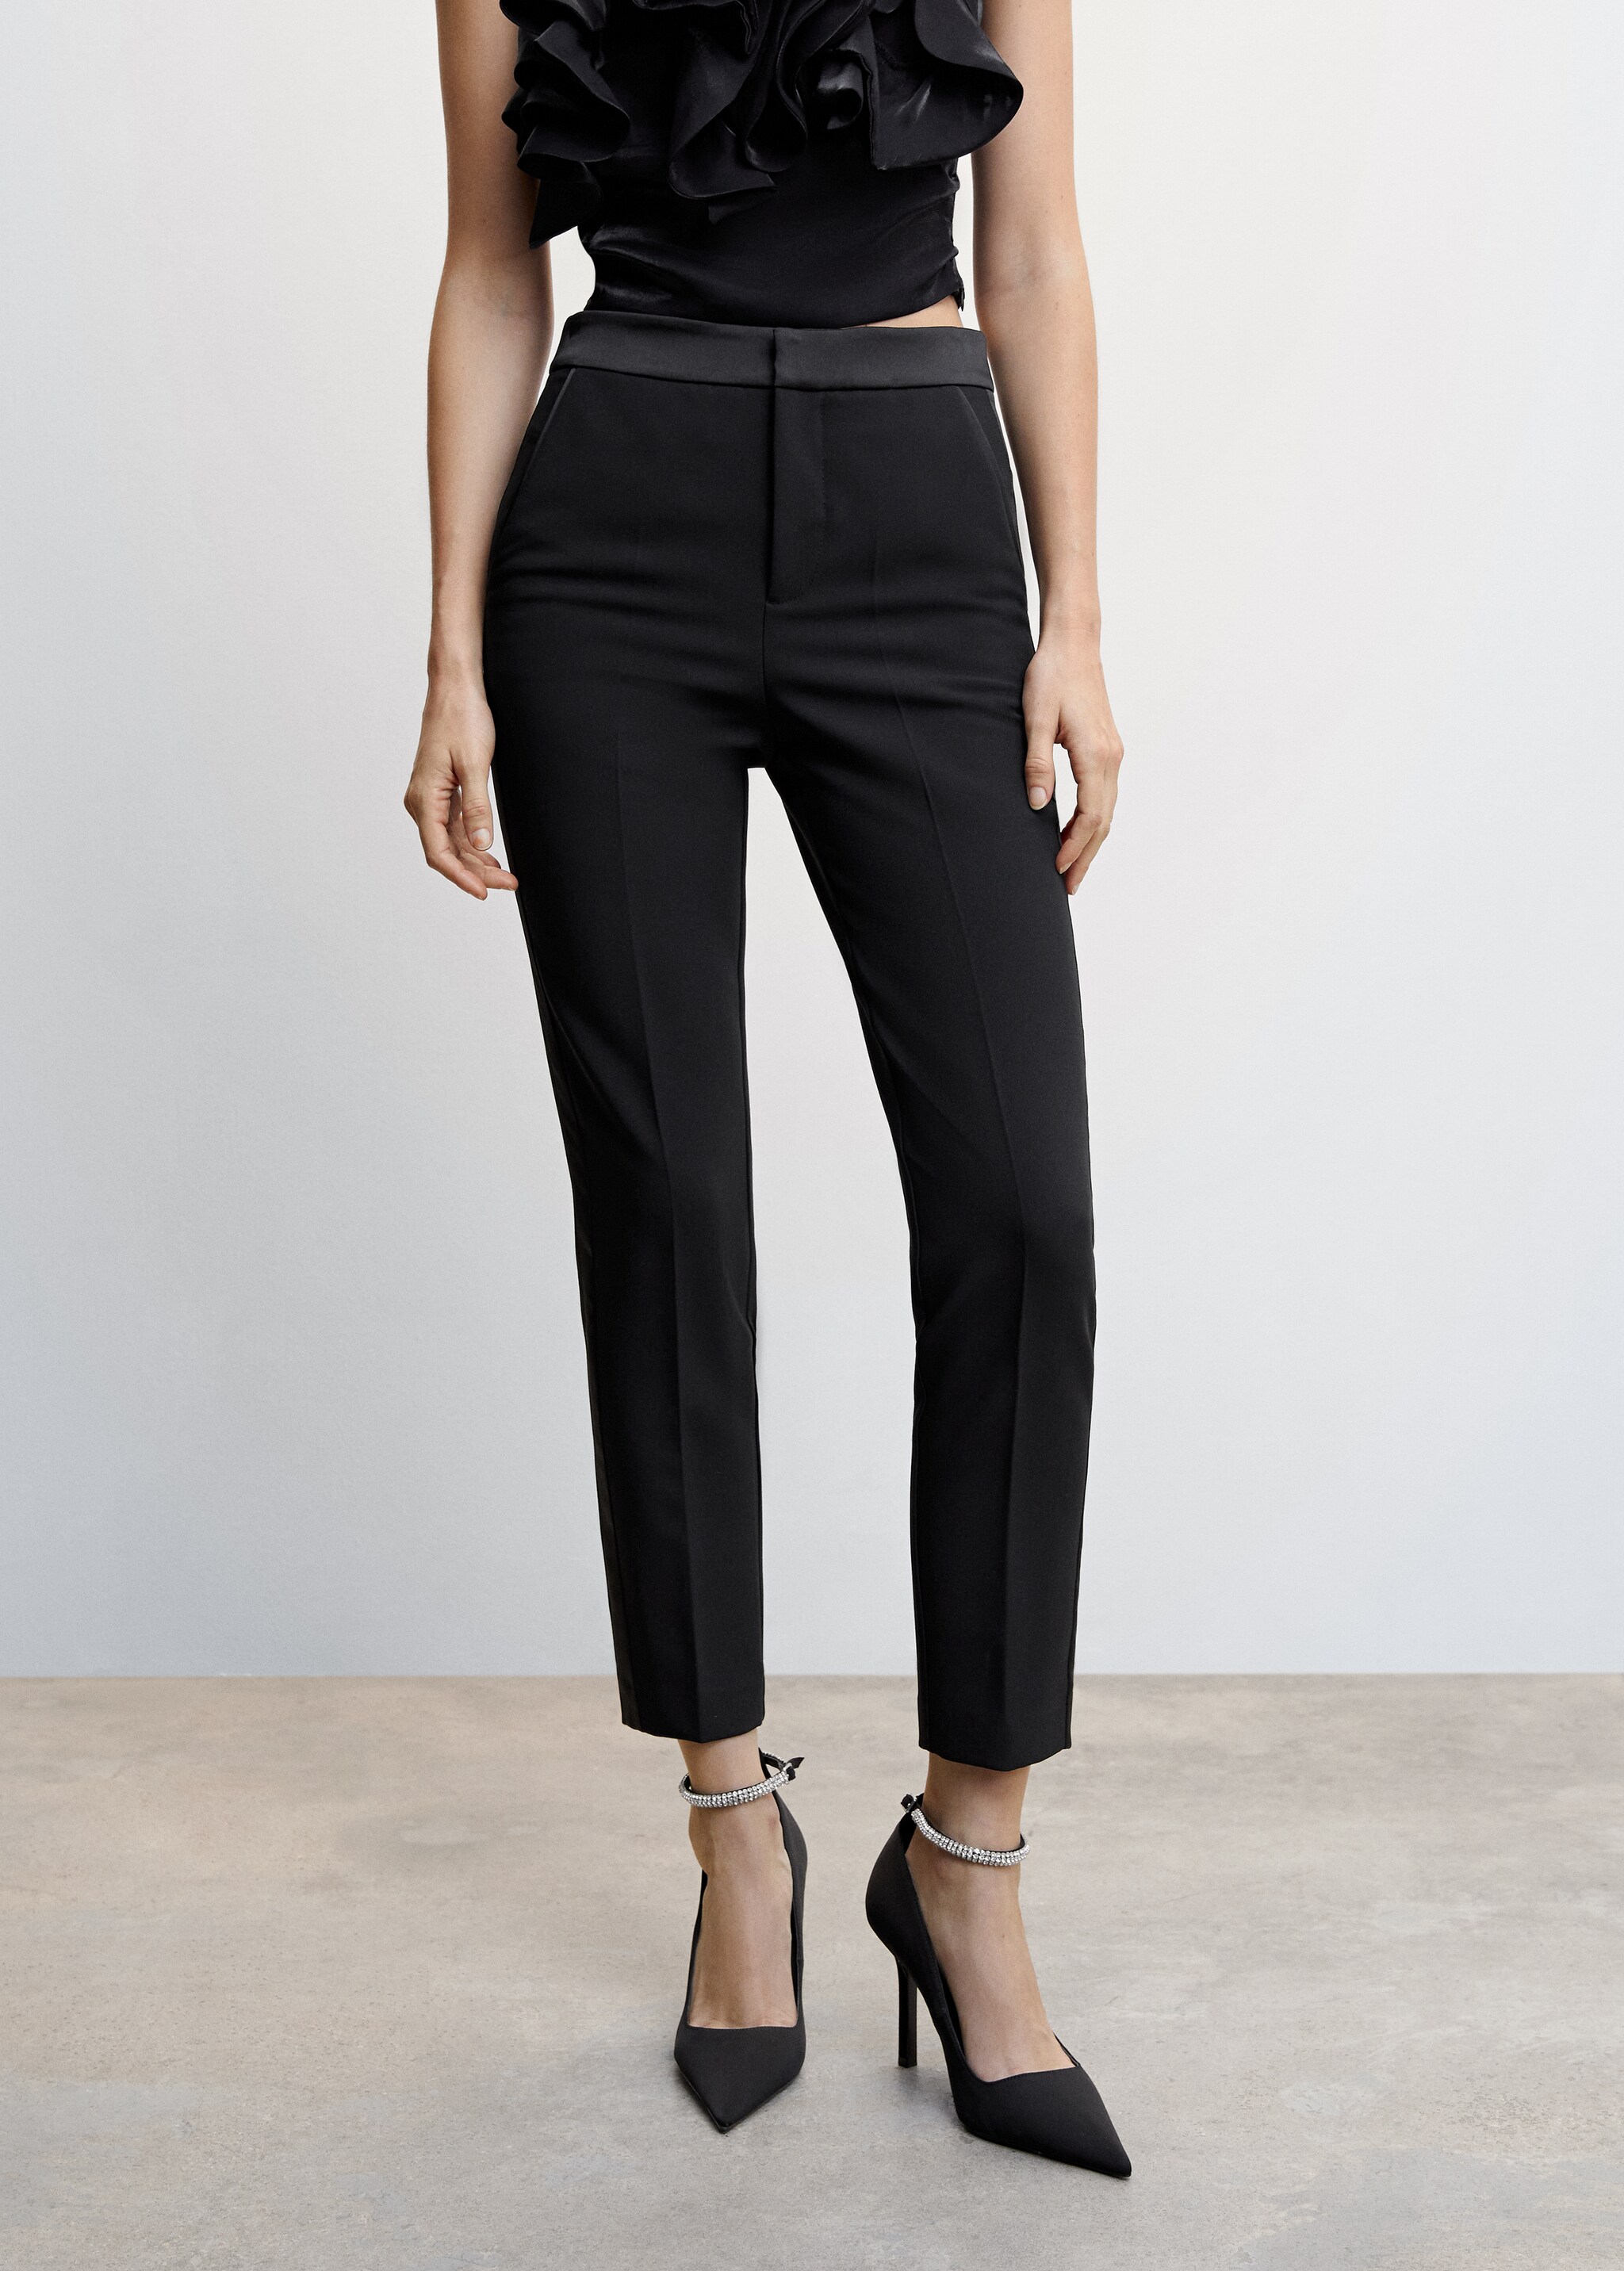 Trousers with satin detail - Medium plane